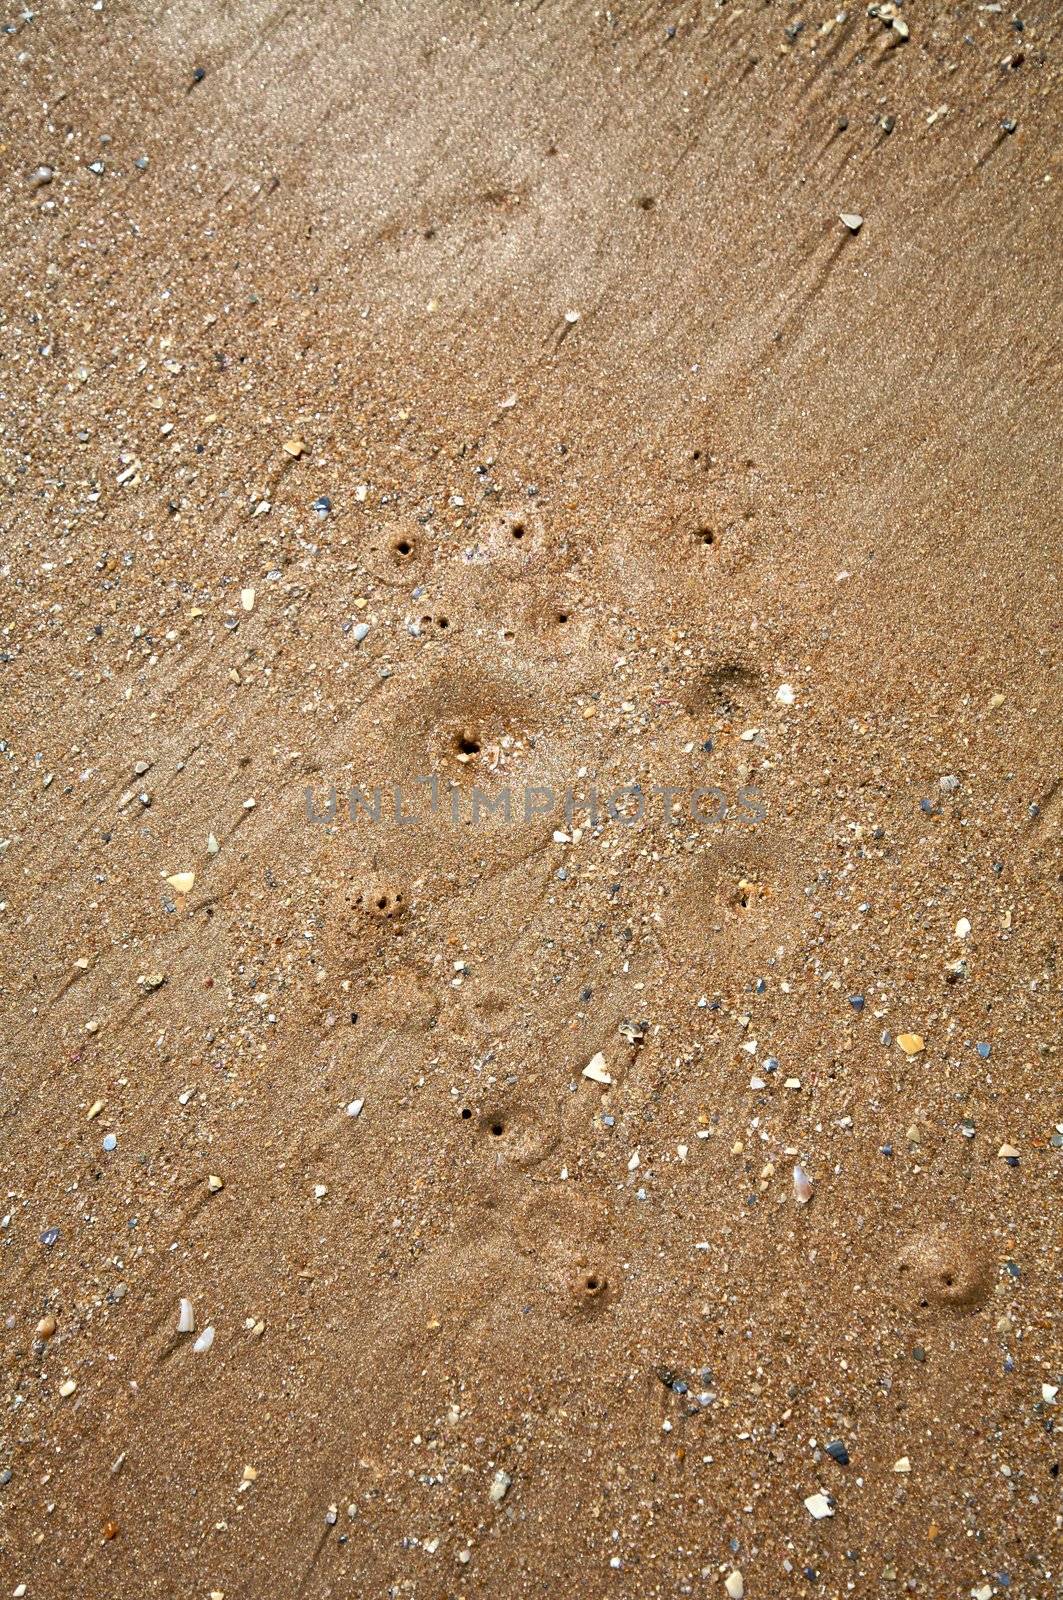 holes on beach sand by quintanilla